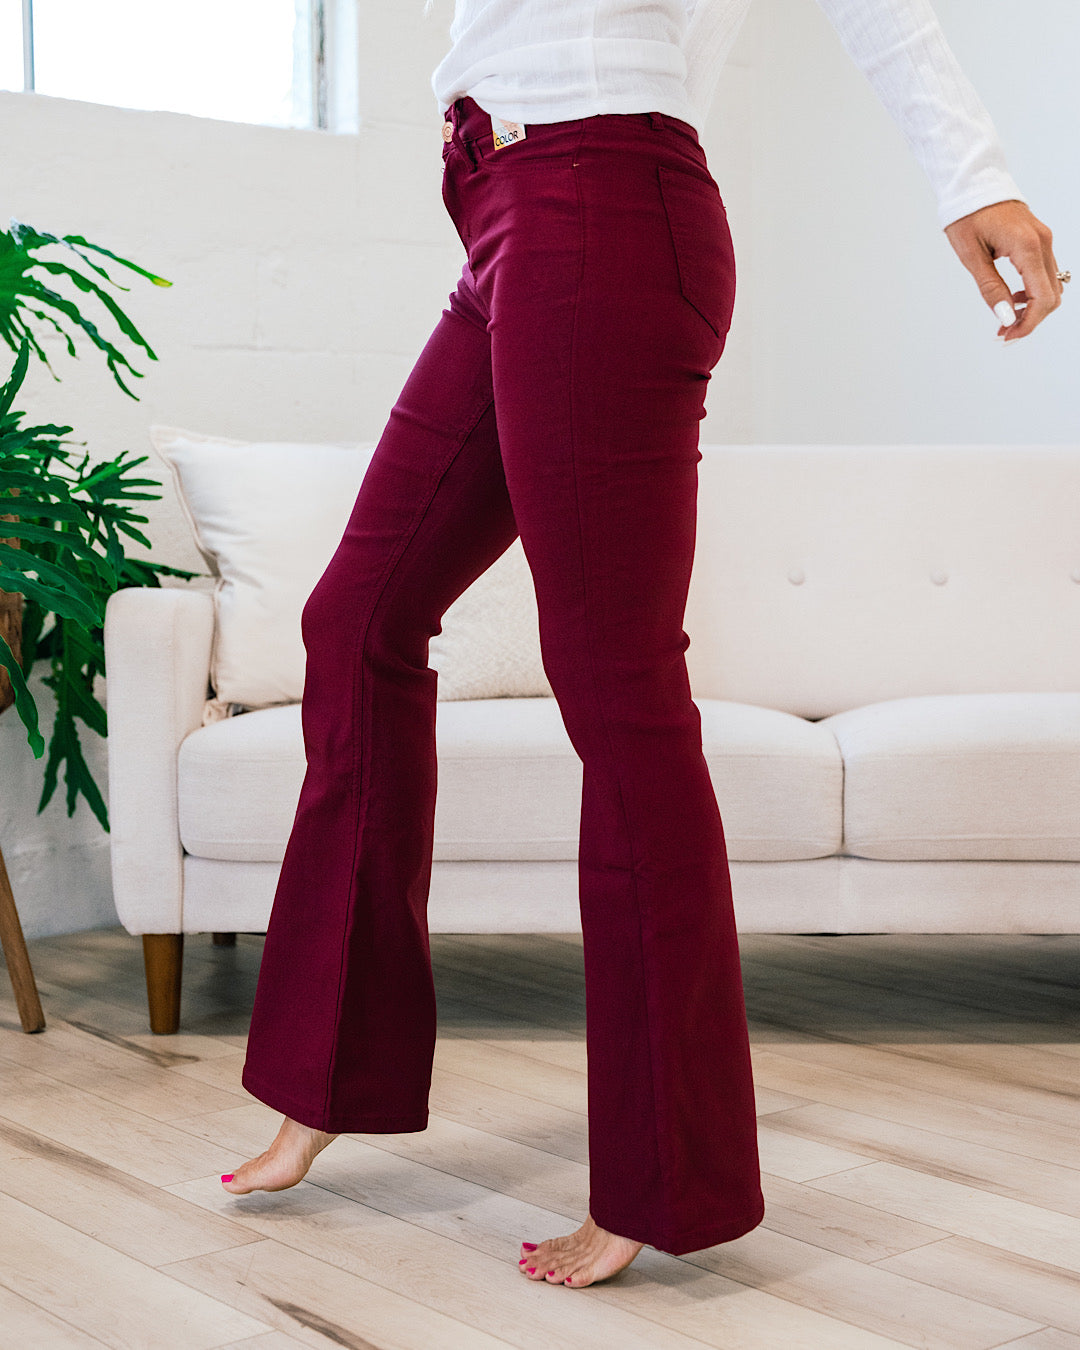 NEW! Hyperstretch Flare Jeans Regular and Plus - Dark Rose  YMI   